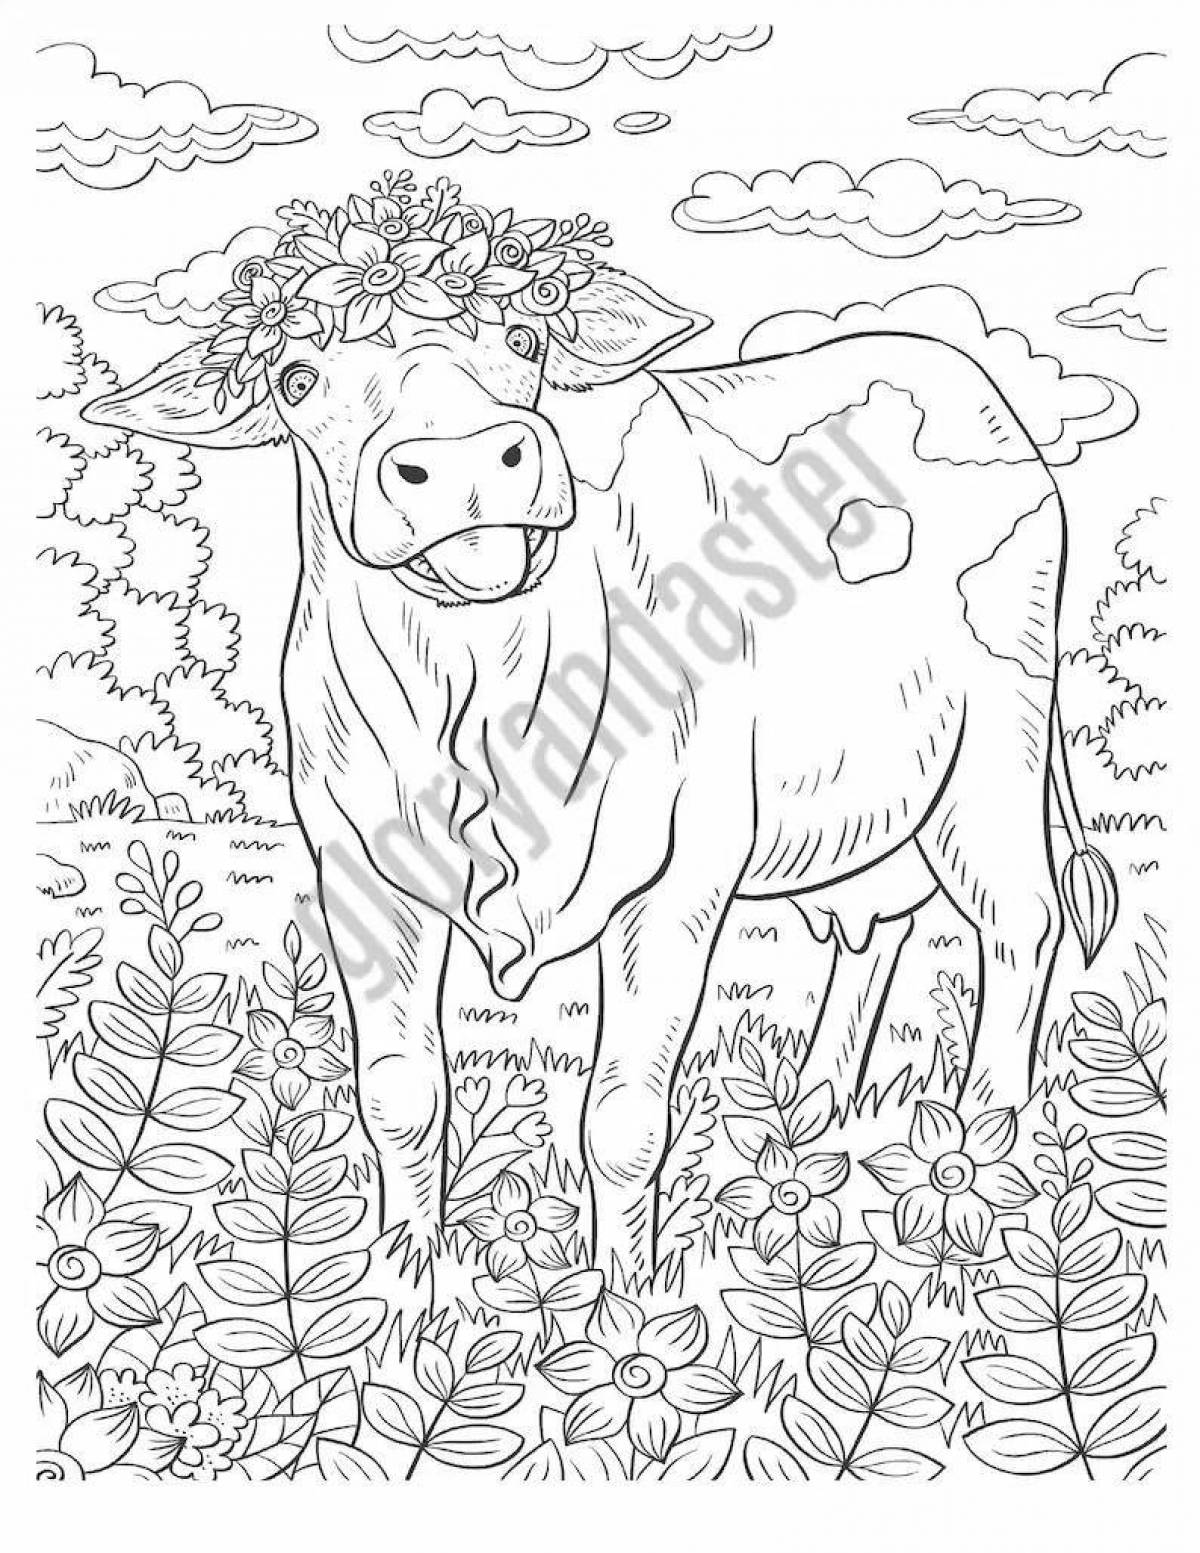 Colouring page with gorgeous cow print